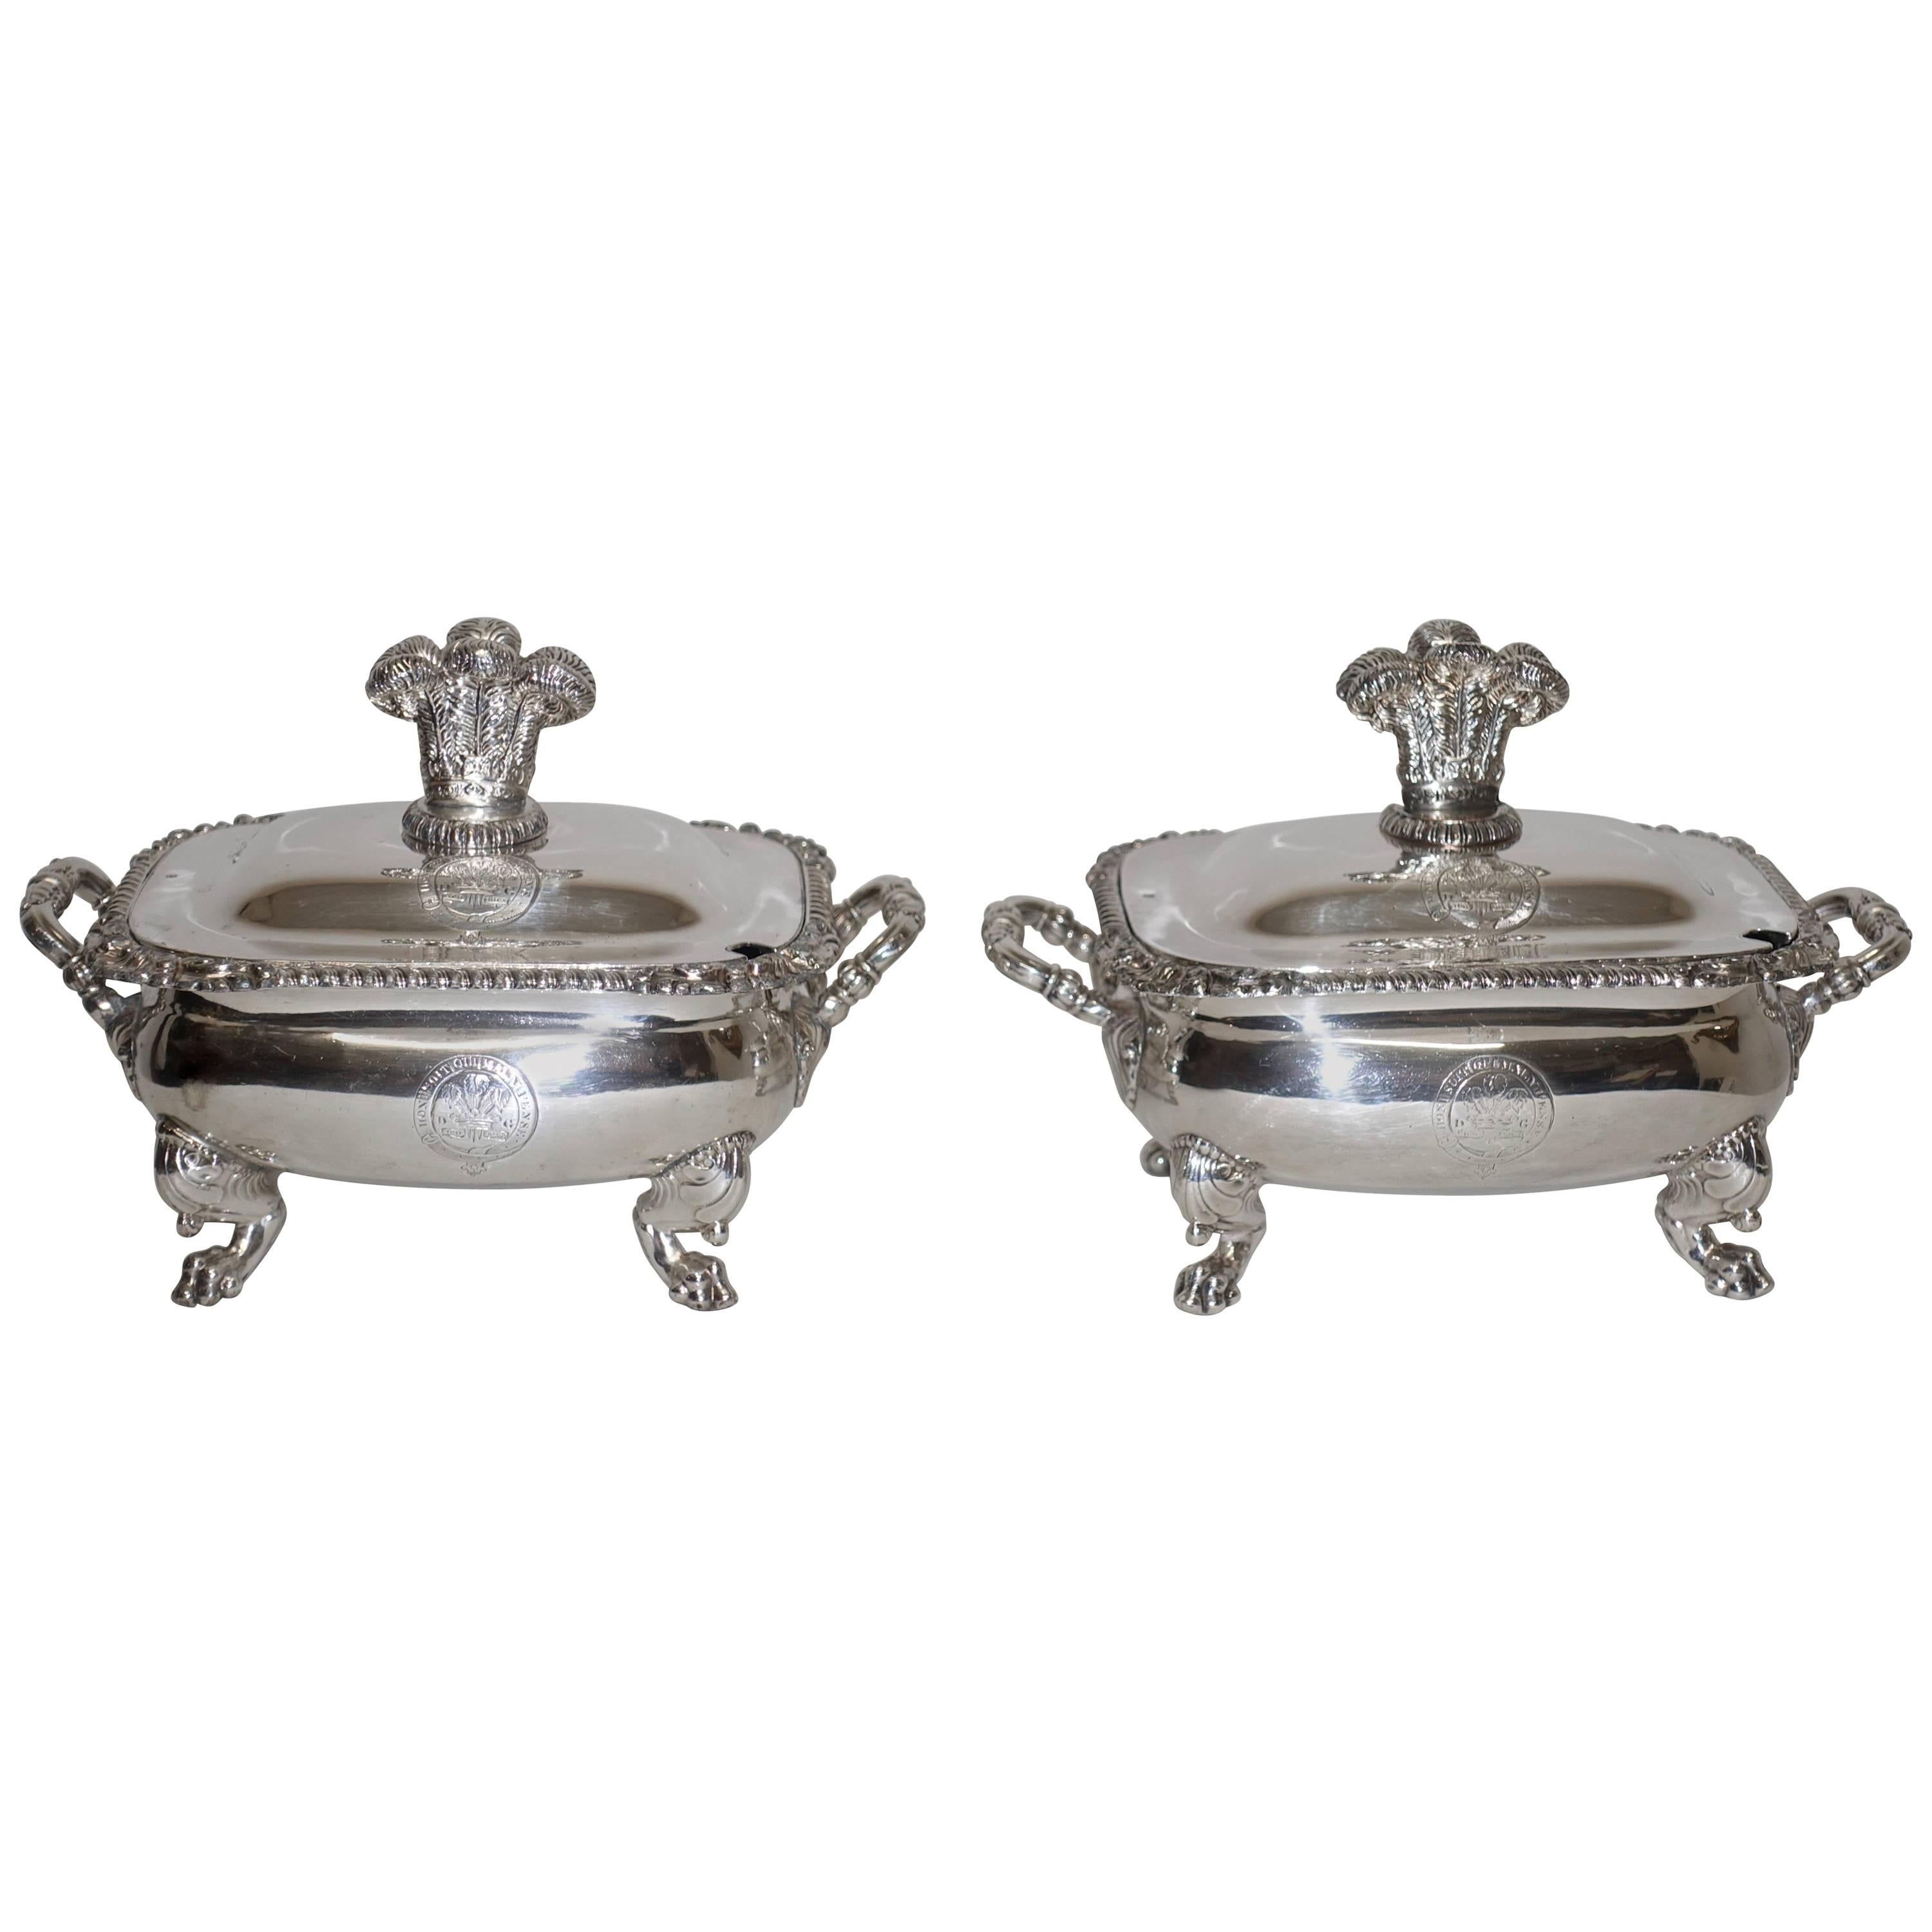 Pair of Sheffield Silver Plate Sauce Tureens English, 19th Century